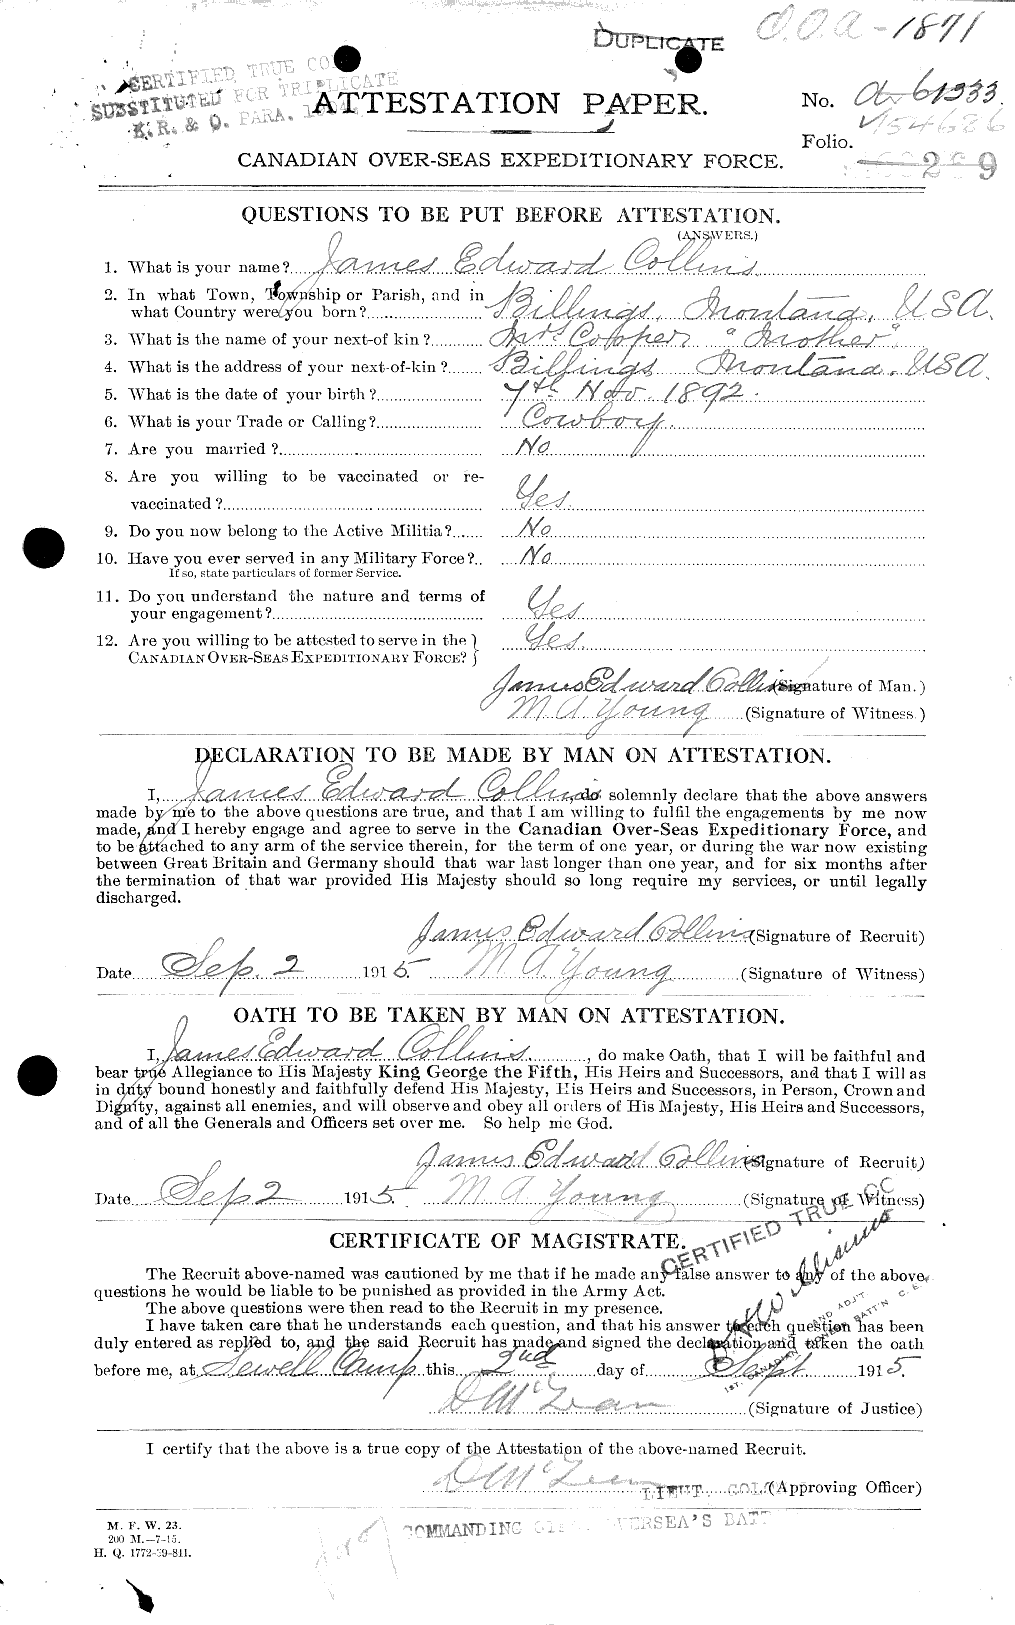 Personnel Records of the First World War - CEF 037930a